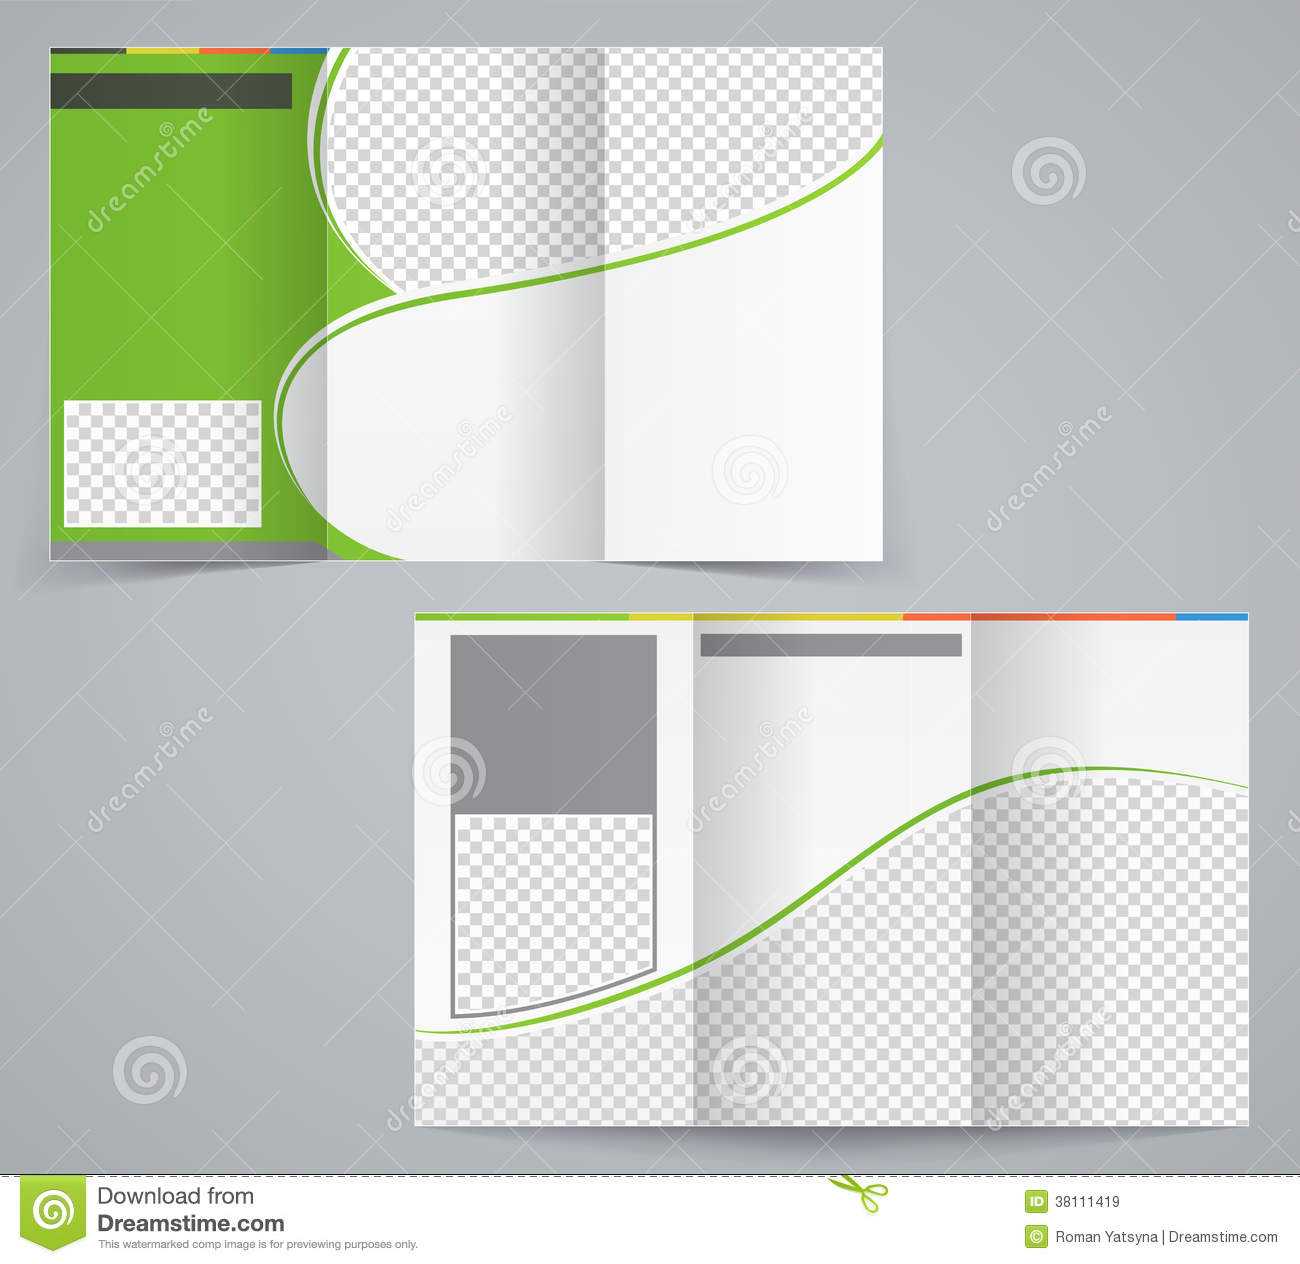 Tri Fold Business Brochure Template, Vector Green Stock With Regard To Free Illustrator Brochure Templates Download